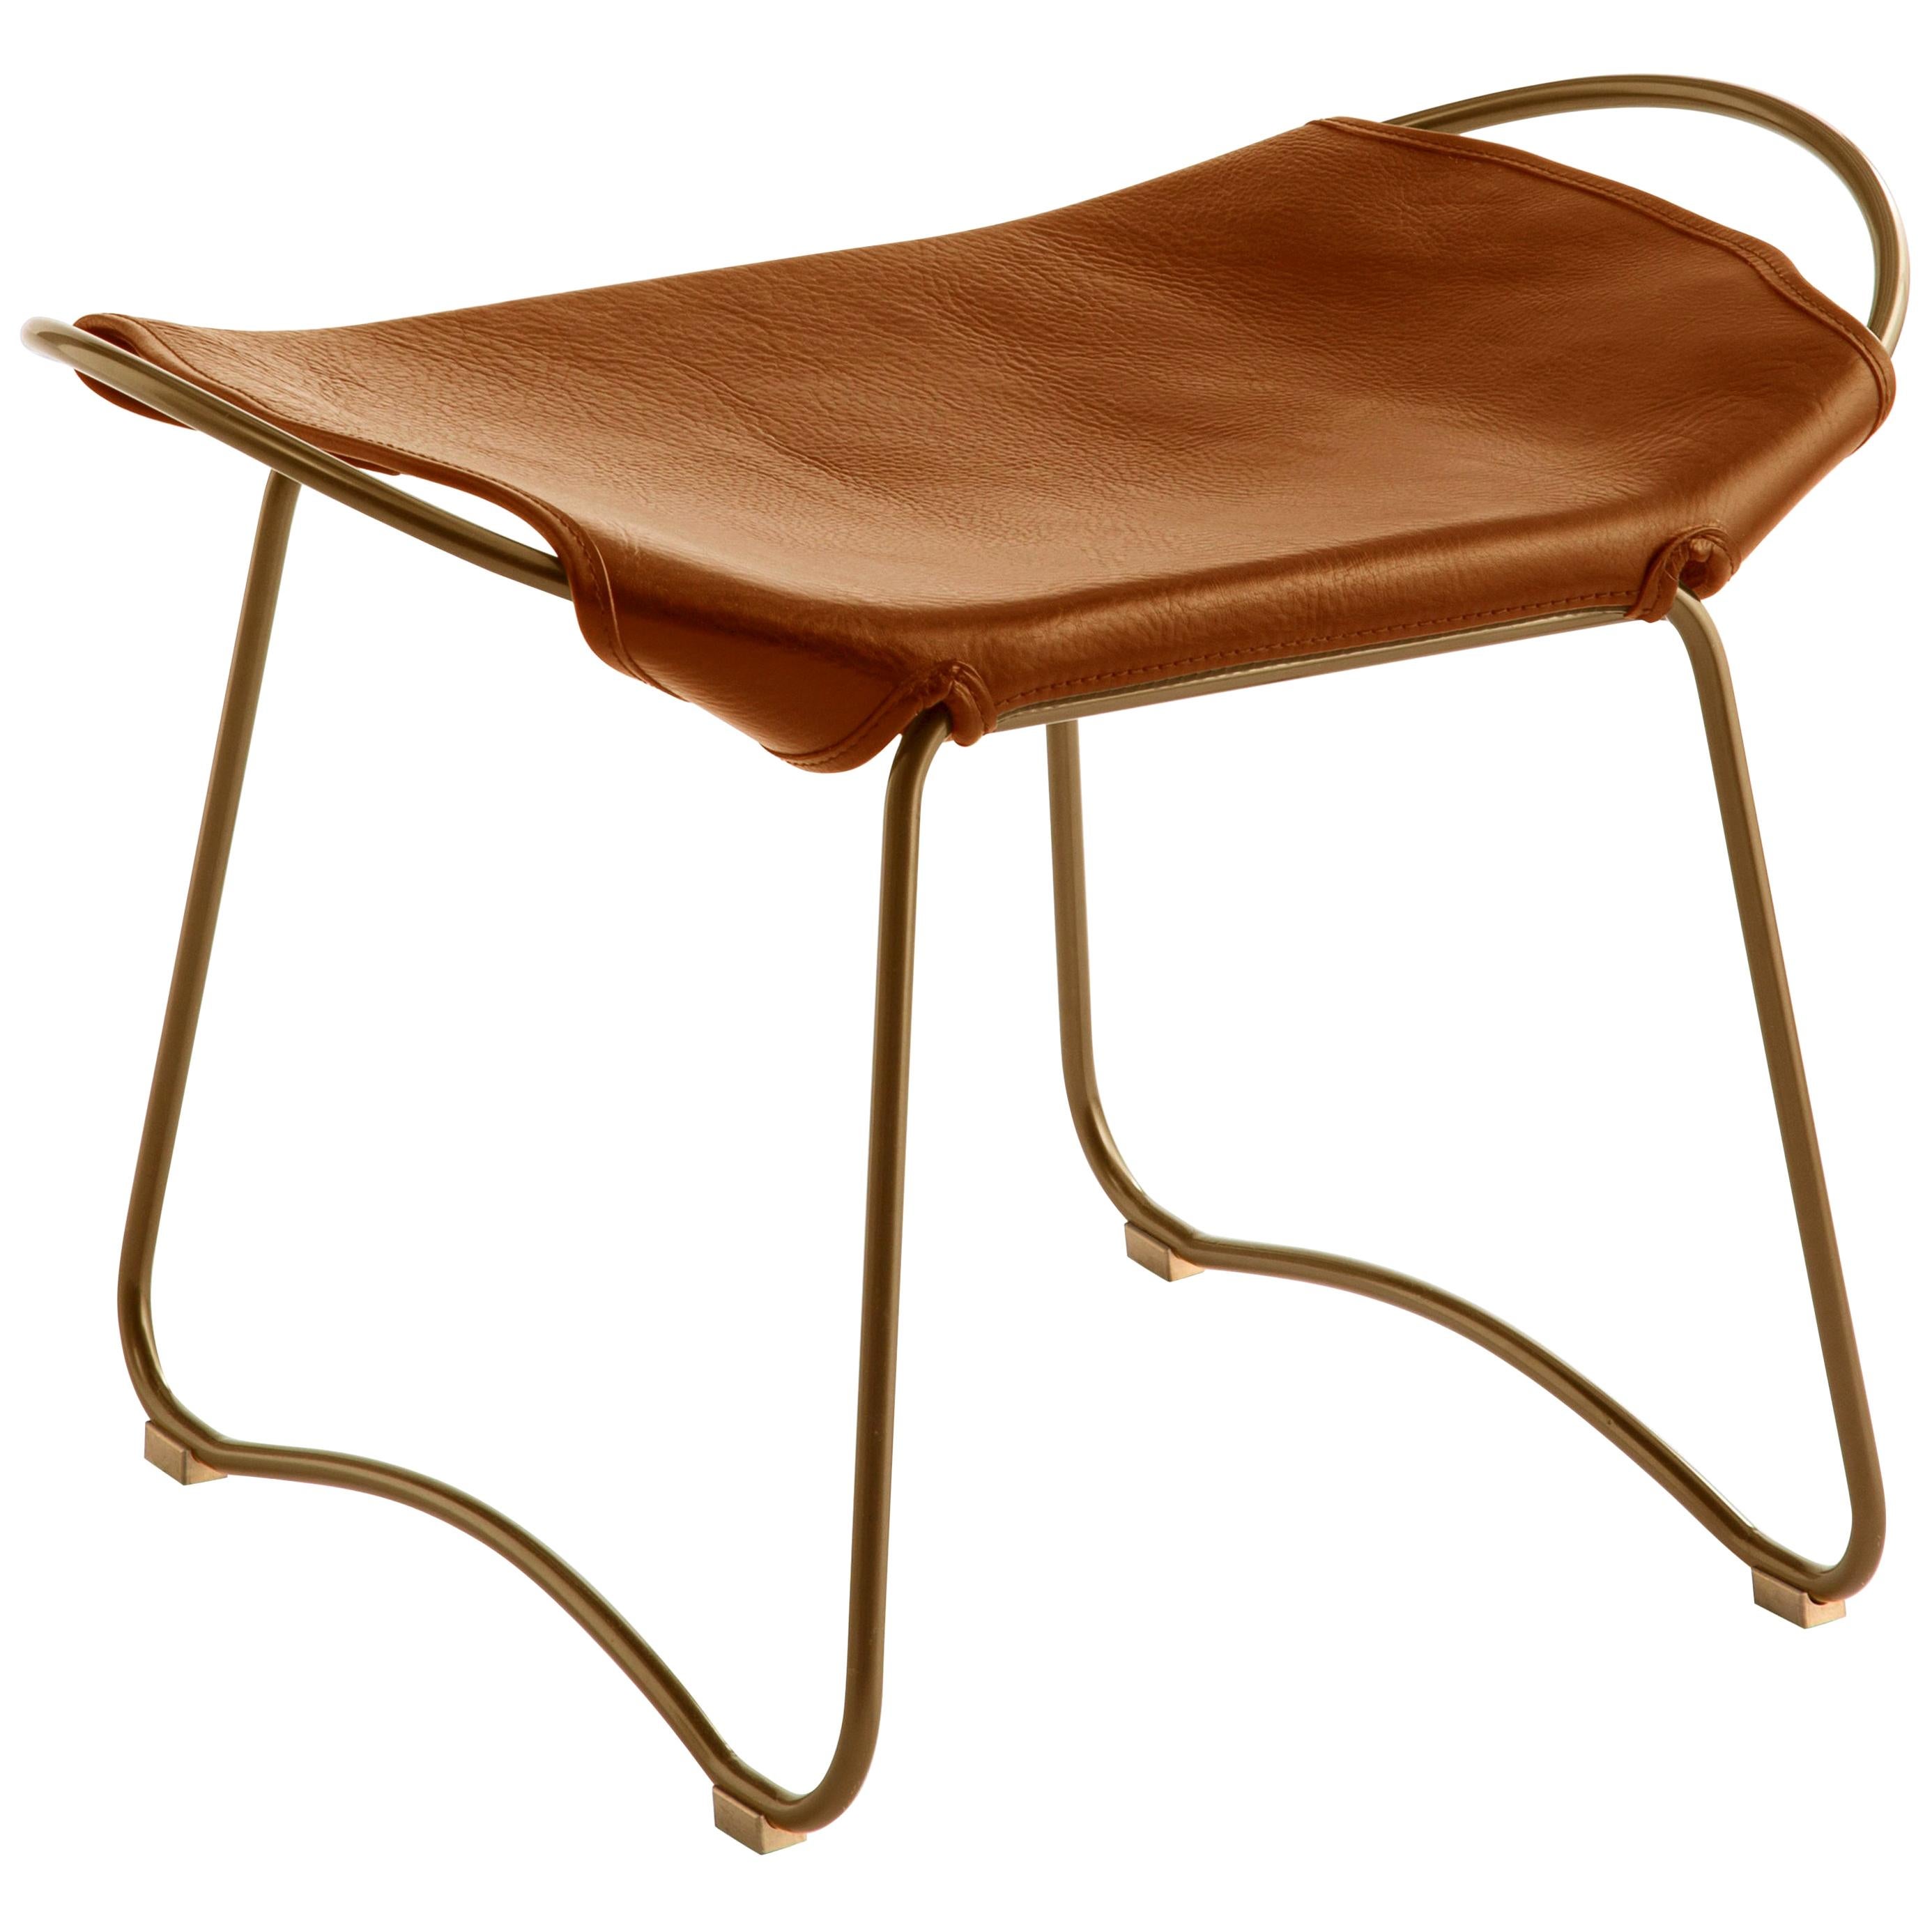 Footstool Brass Steel and Tobacco Leather, Modern Style, Hug Collection